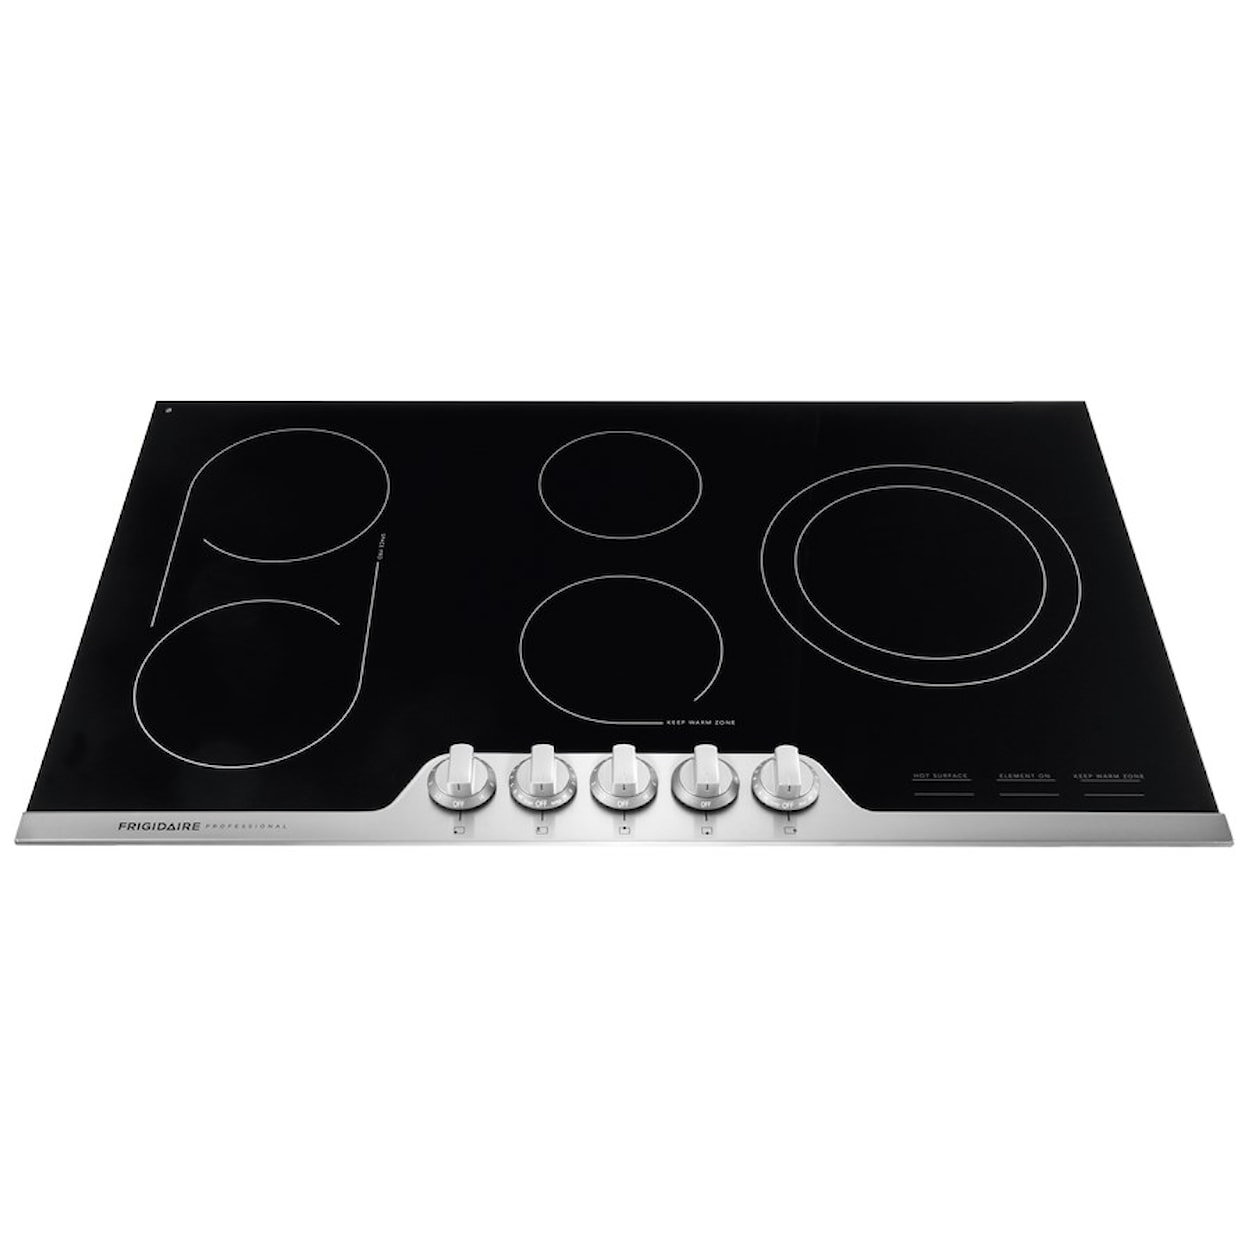 Frigidaire Professional Collection - Cooktops 36" Electric Cooktop